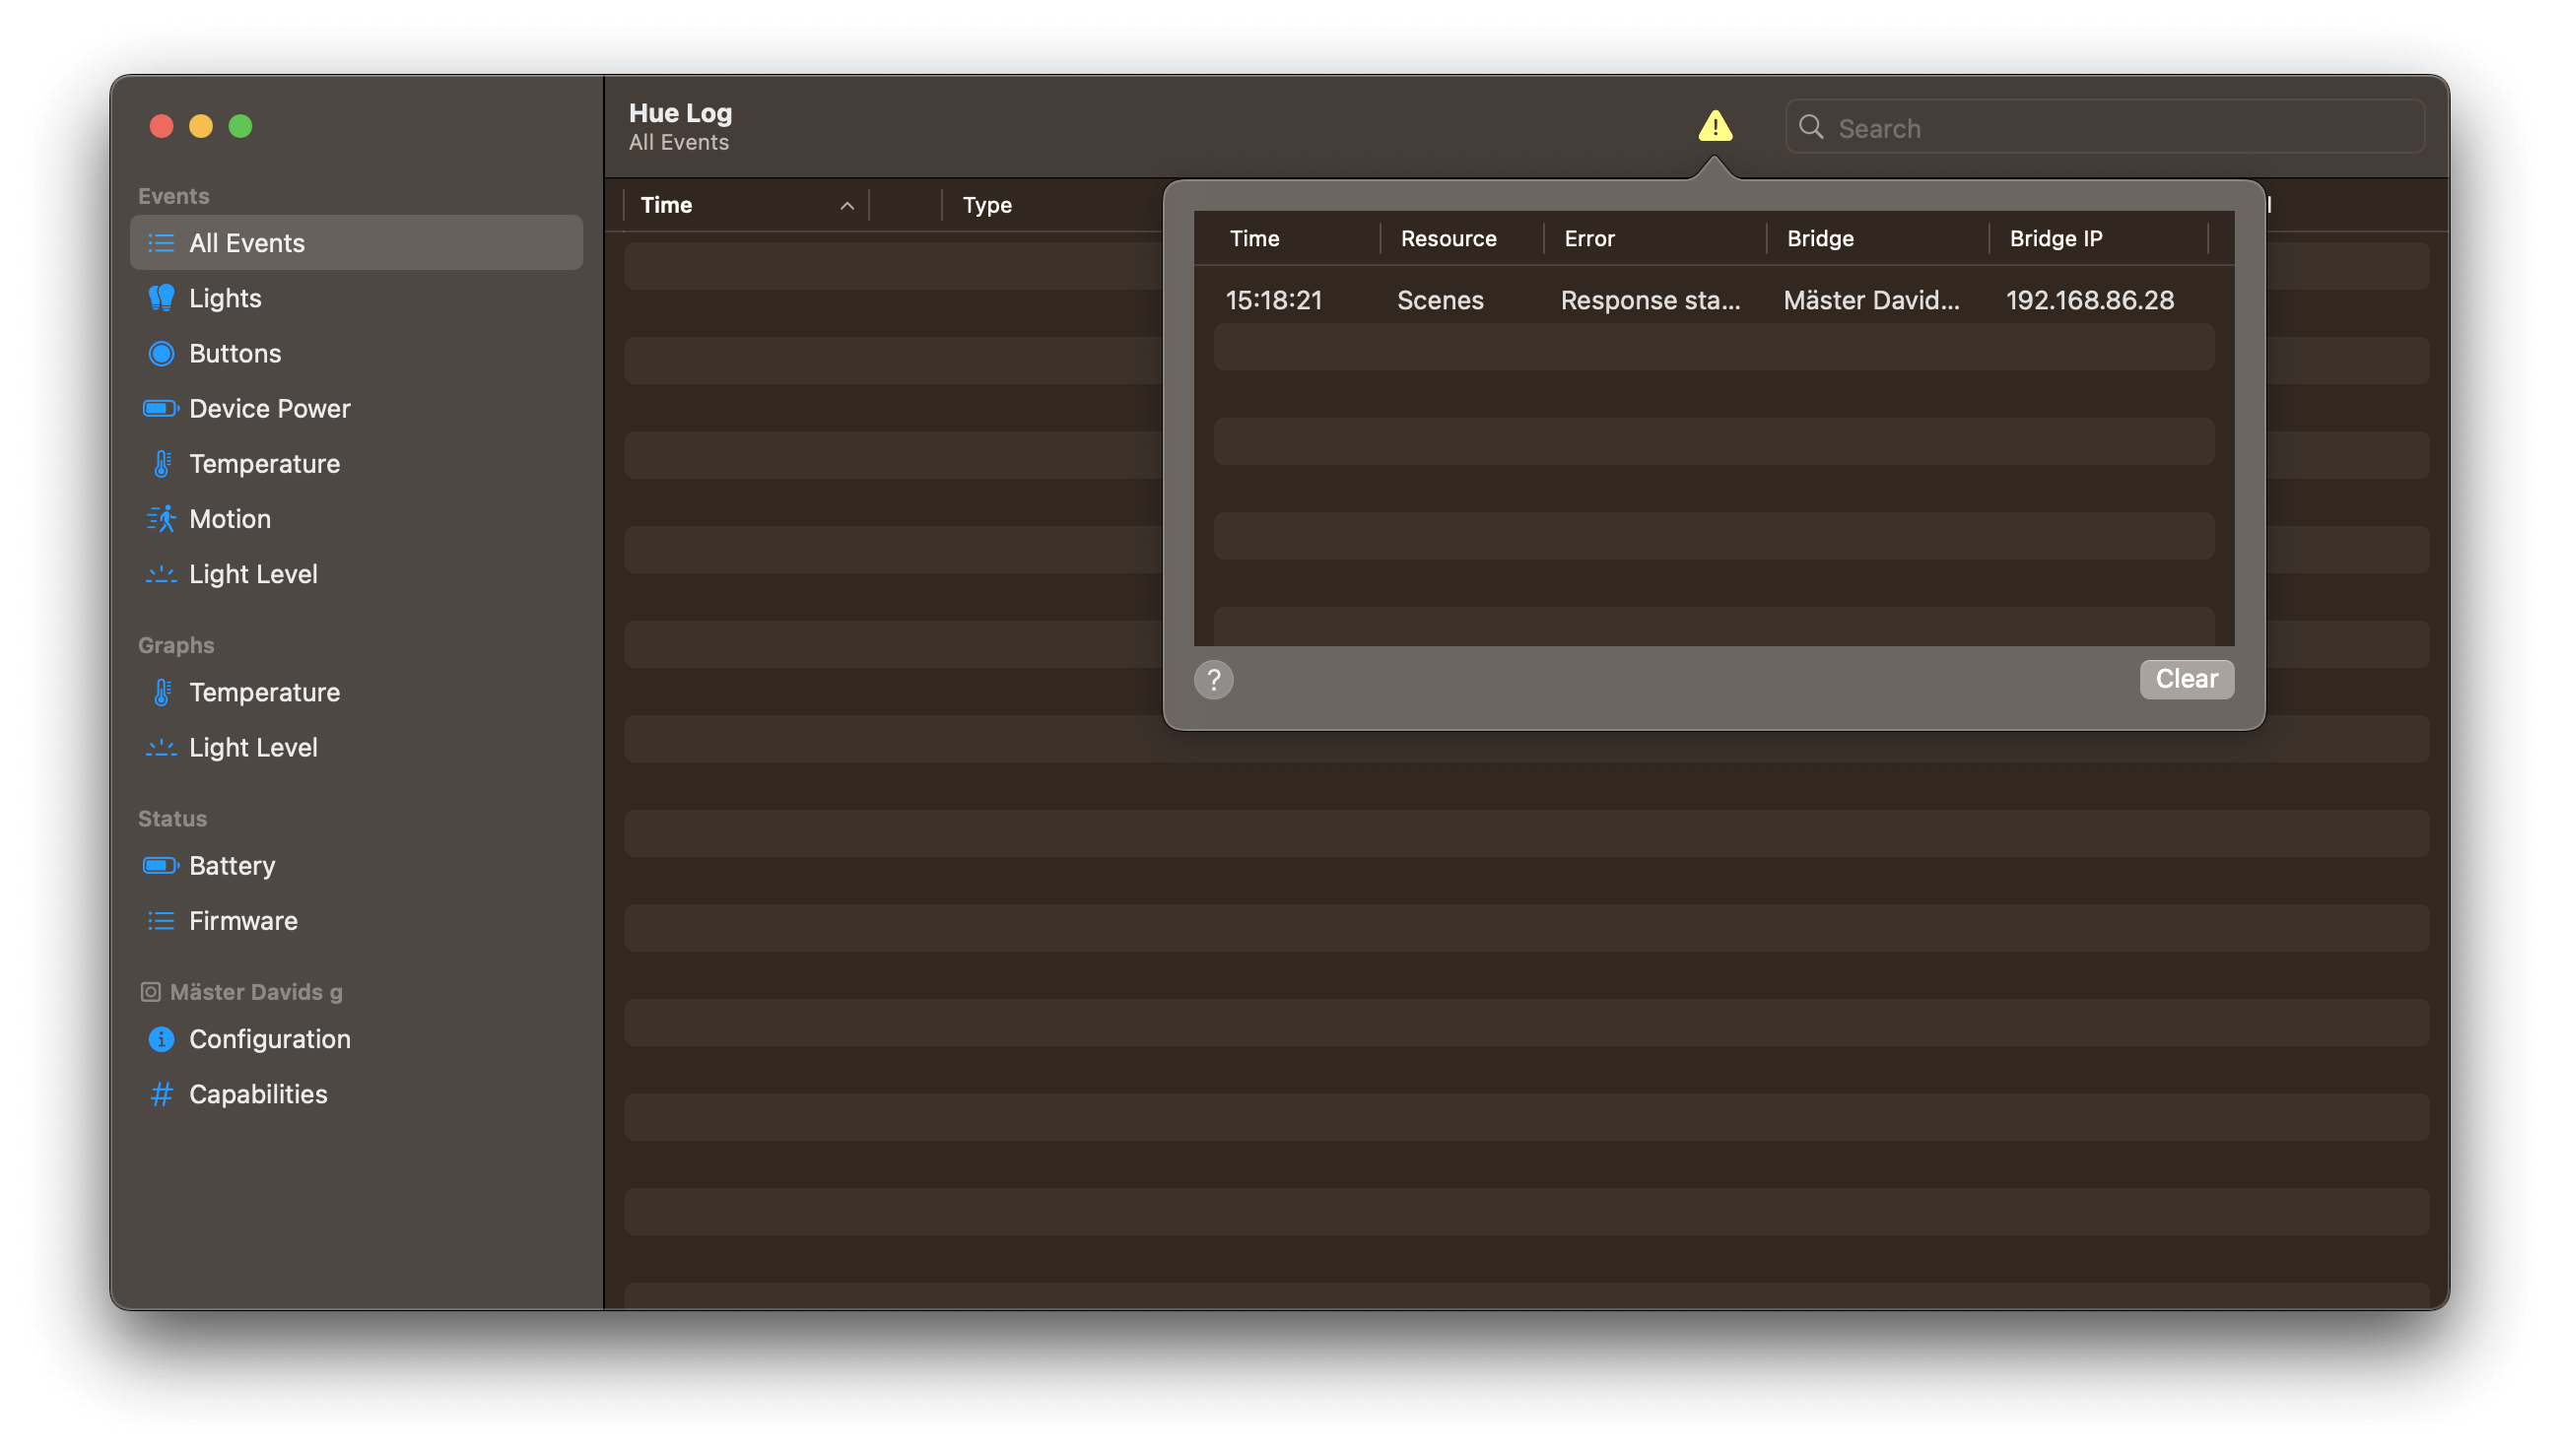 Screenshot of the error message view in Hue Log